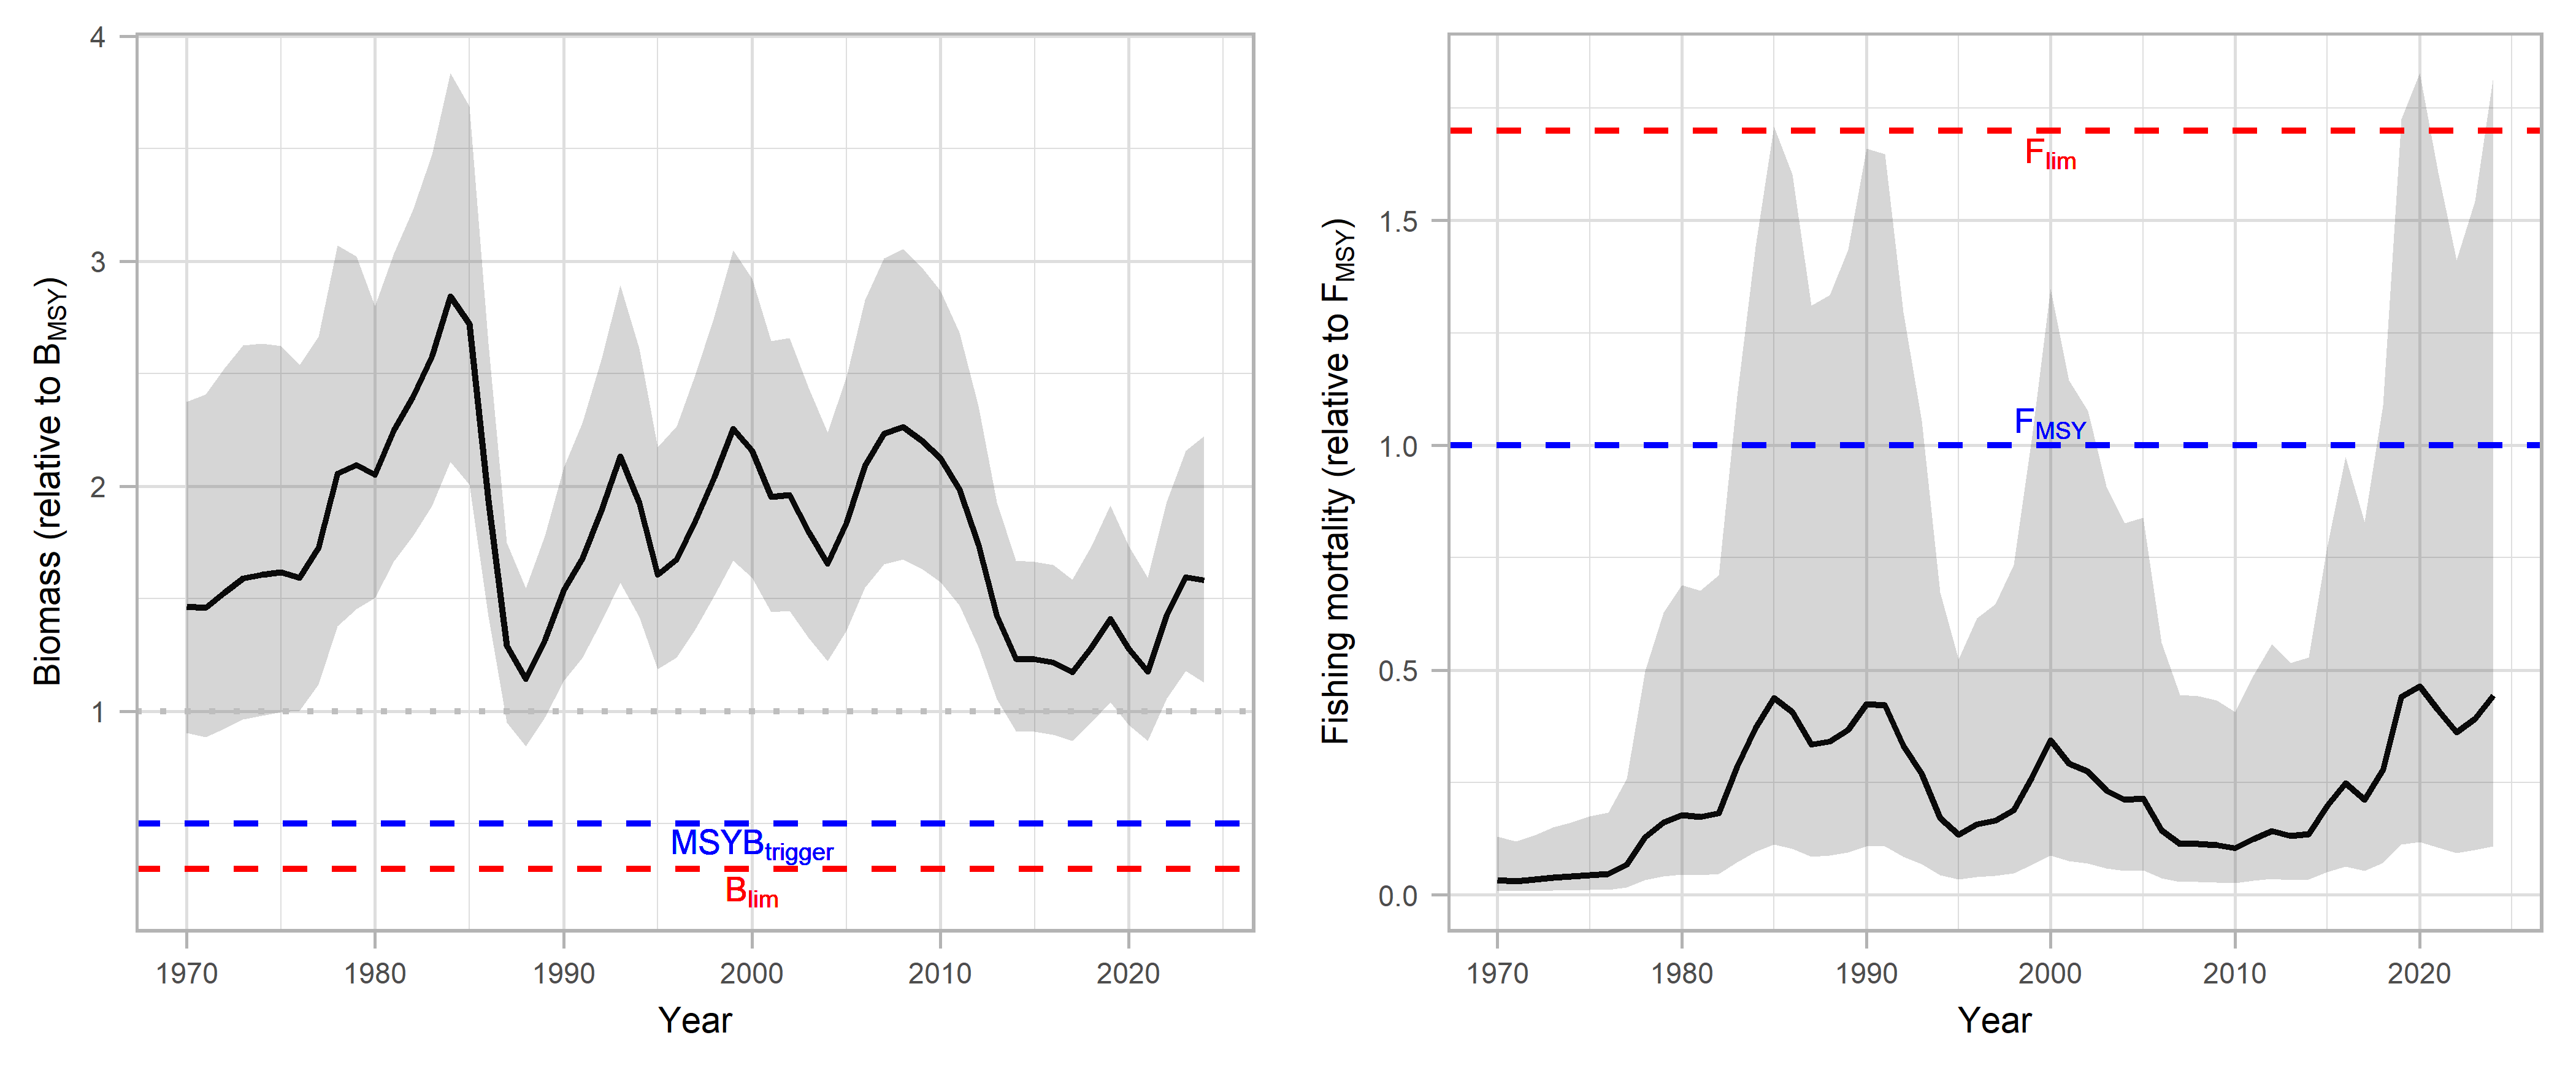 Figure 8: Estimated relative biomass (B/Bmsy) and fishing mortality (F/Fmsy) since 1970. Solid lines represent the mean estimates, shaded surfaces the 95% confidence intervals. MSY and precautionary approach reference points are indicated with blue and red dashed lines, respectively.